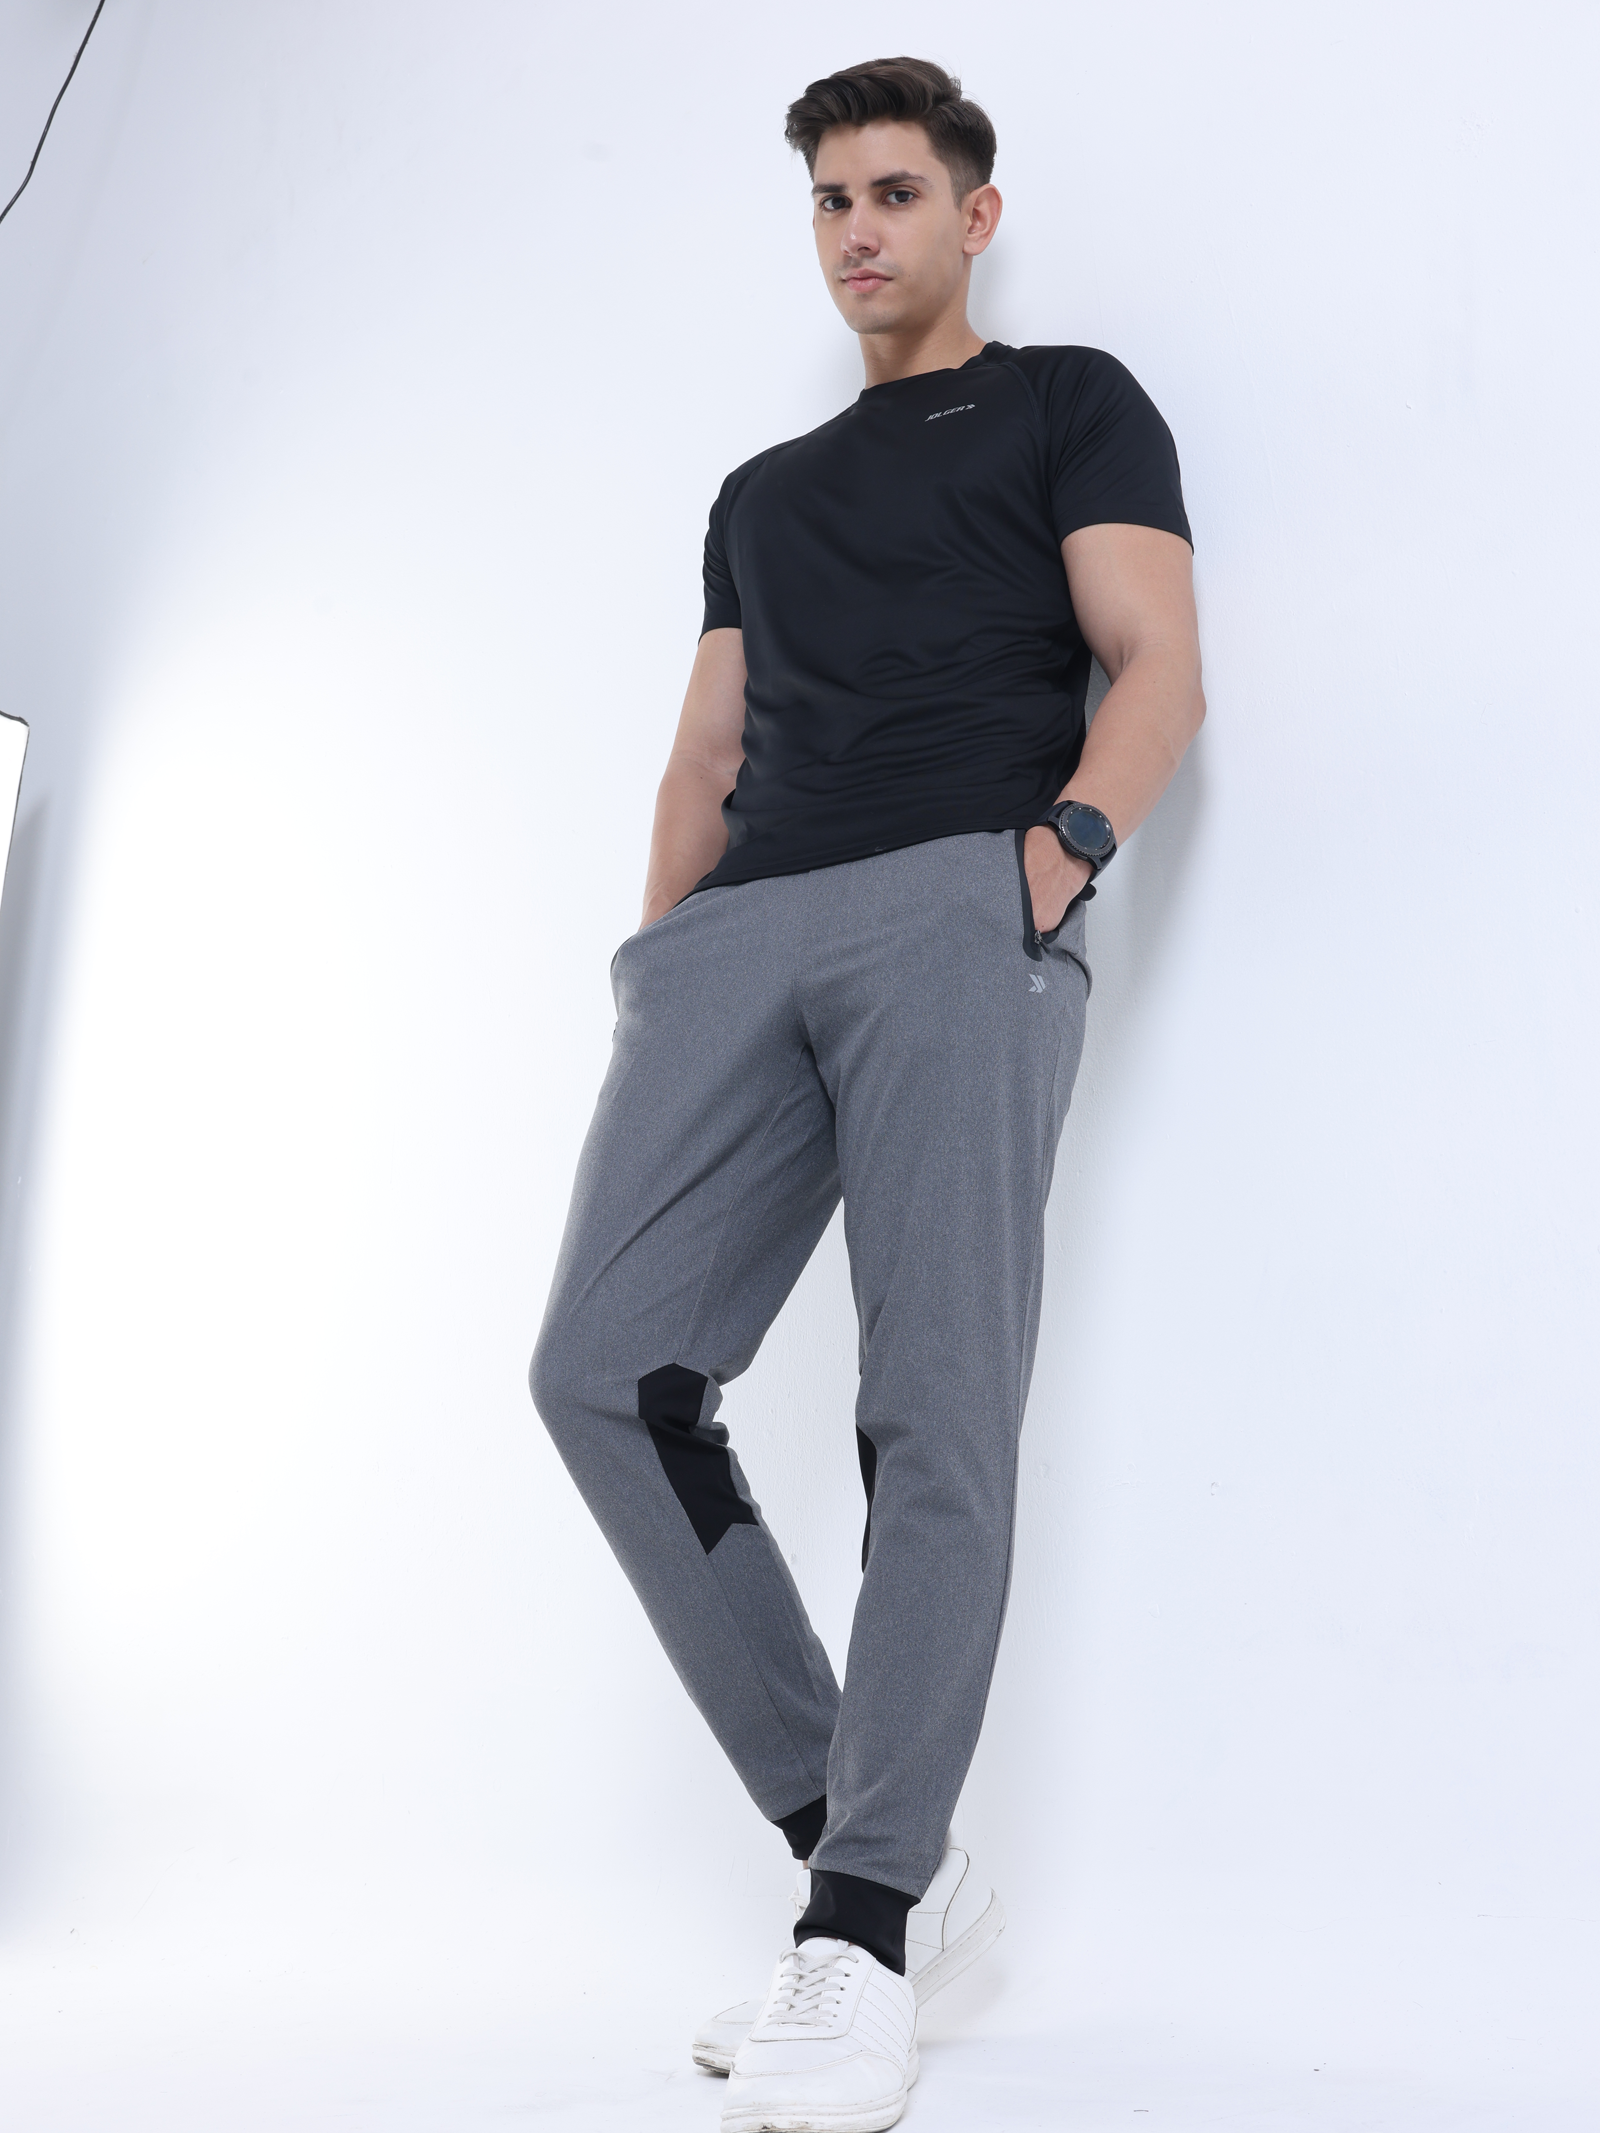 Men's Athletic Workout Jogger Pants with Pockets